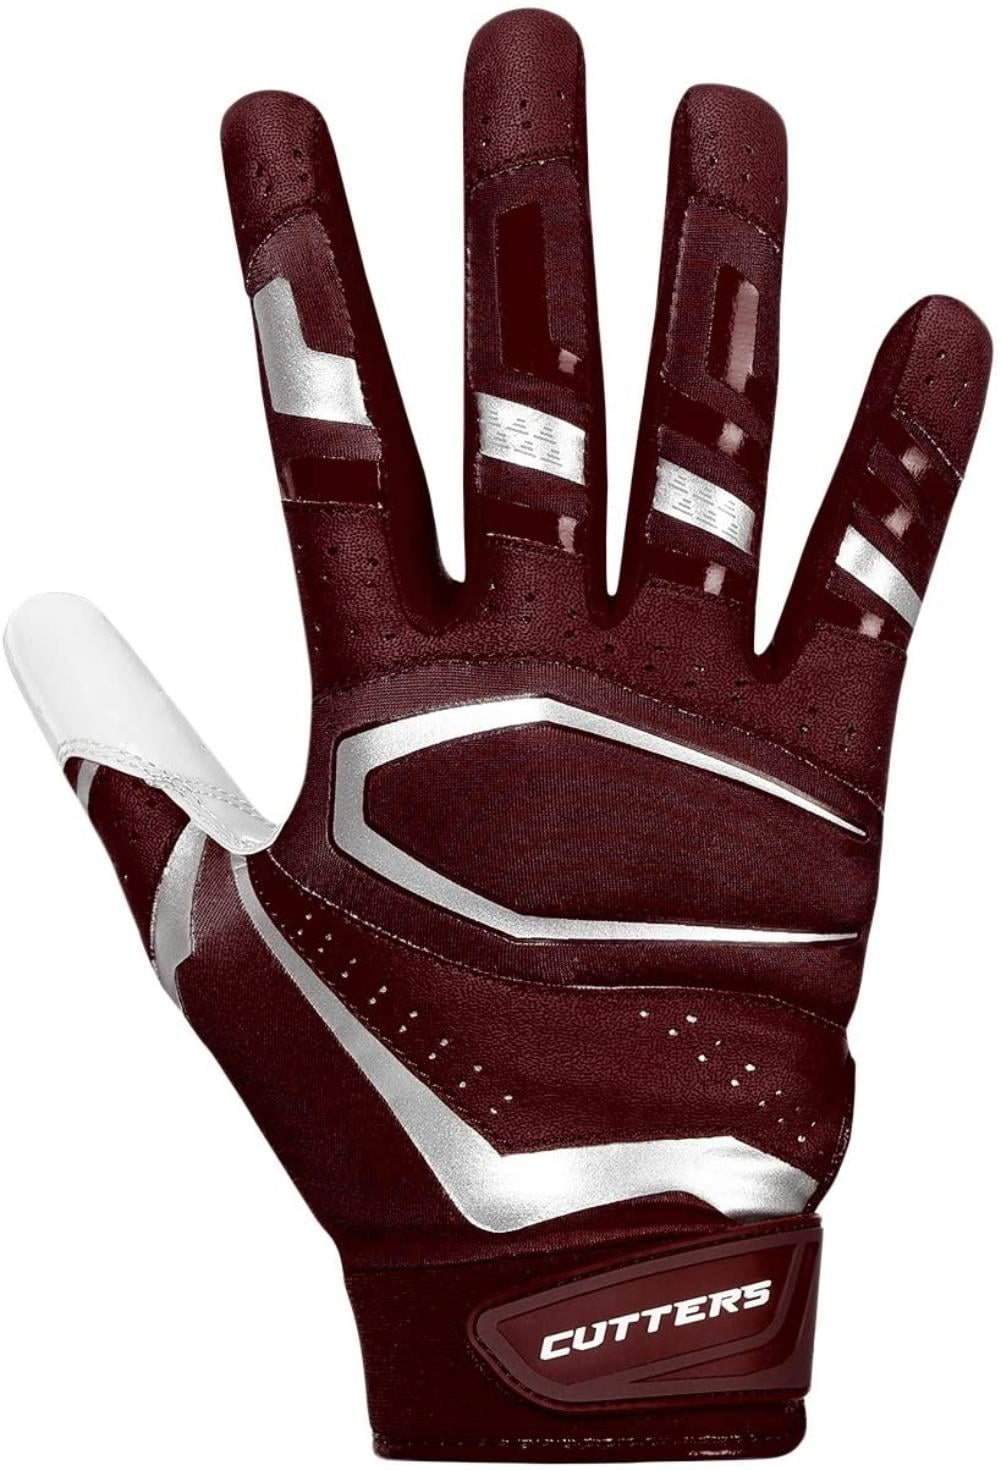 New CUTTERS Rev Pro 2.0 Extreme Grip Football Gloves Adult Small Red C-TACK 